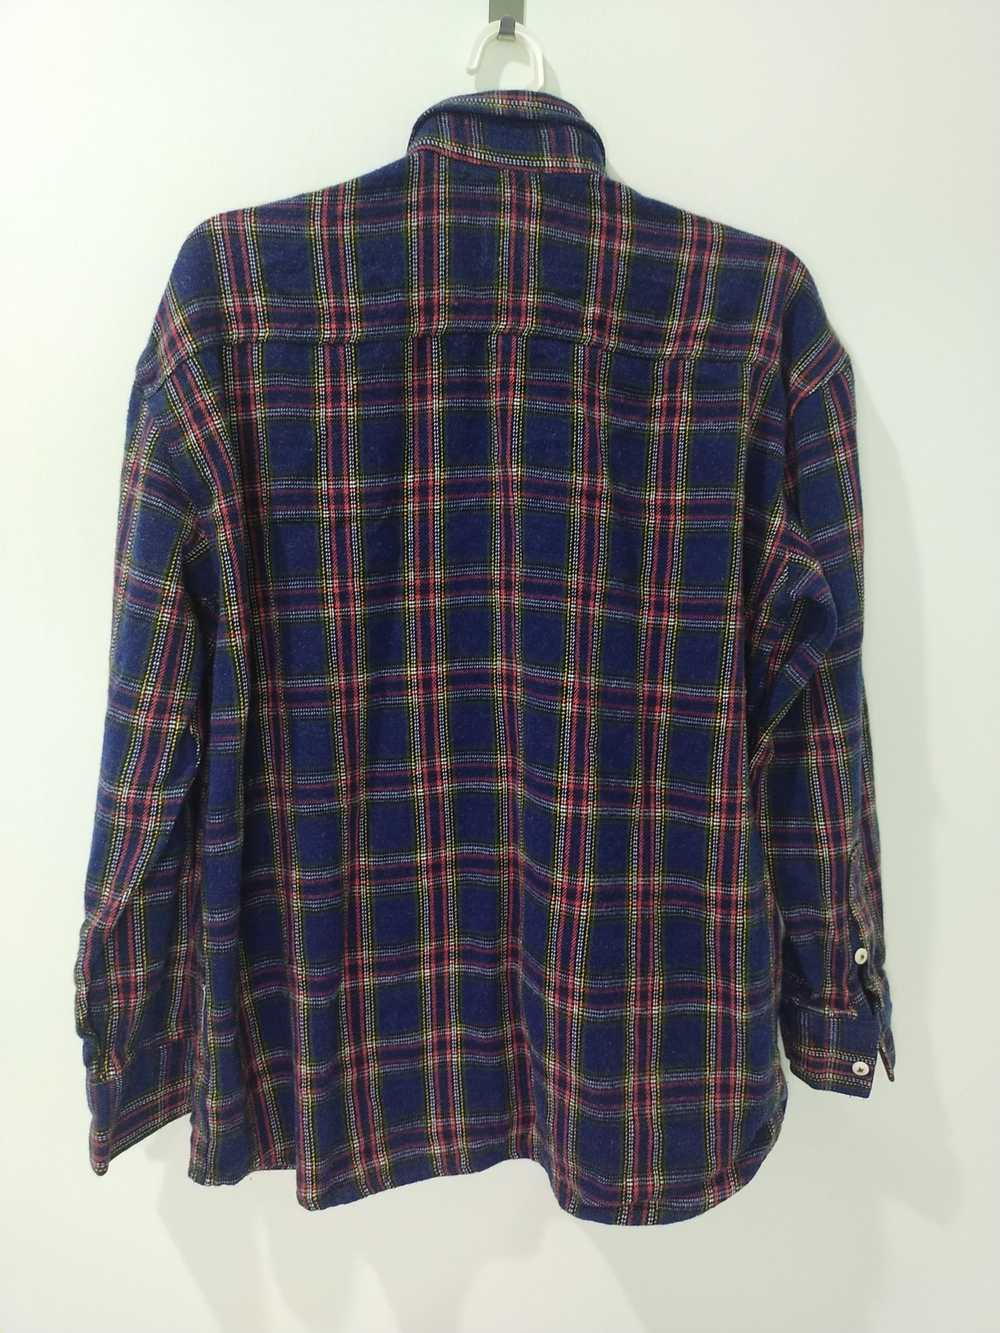 Toys Mccoy McCoy by Gill flannel shirt - image 2